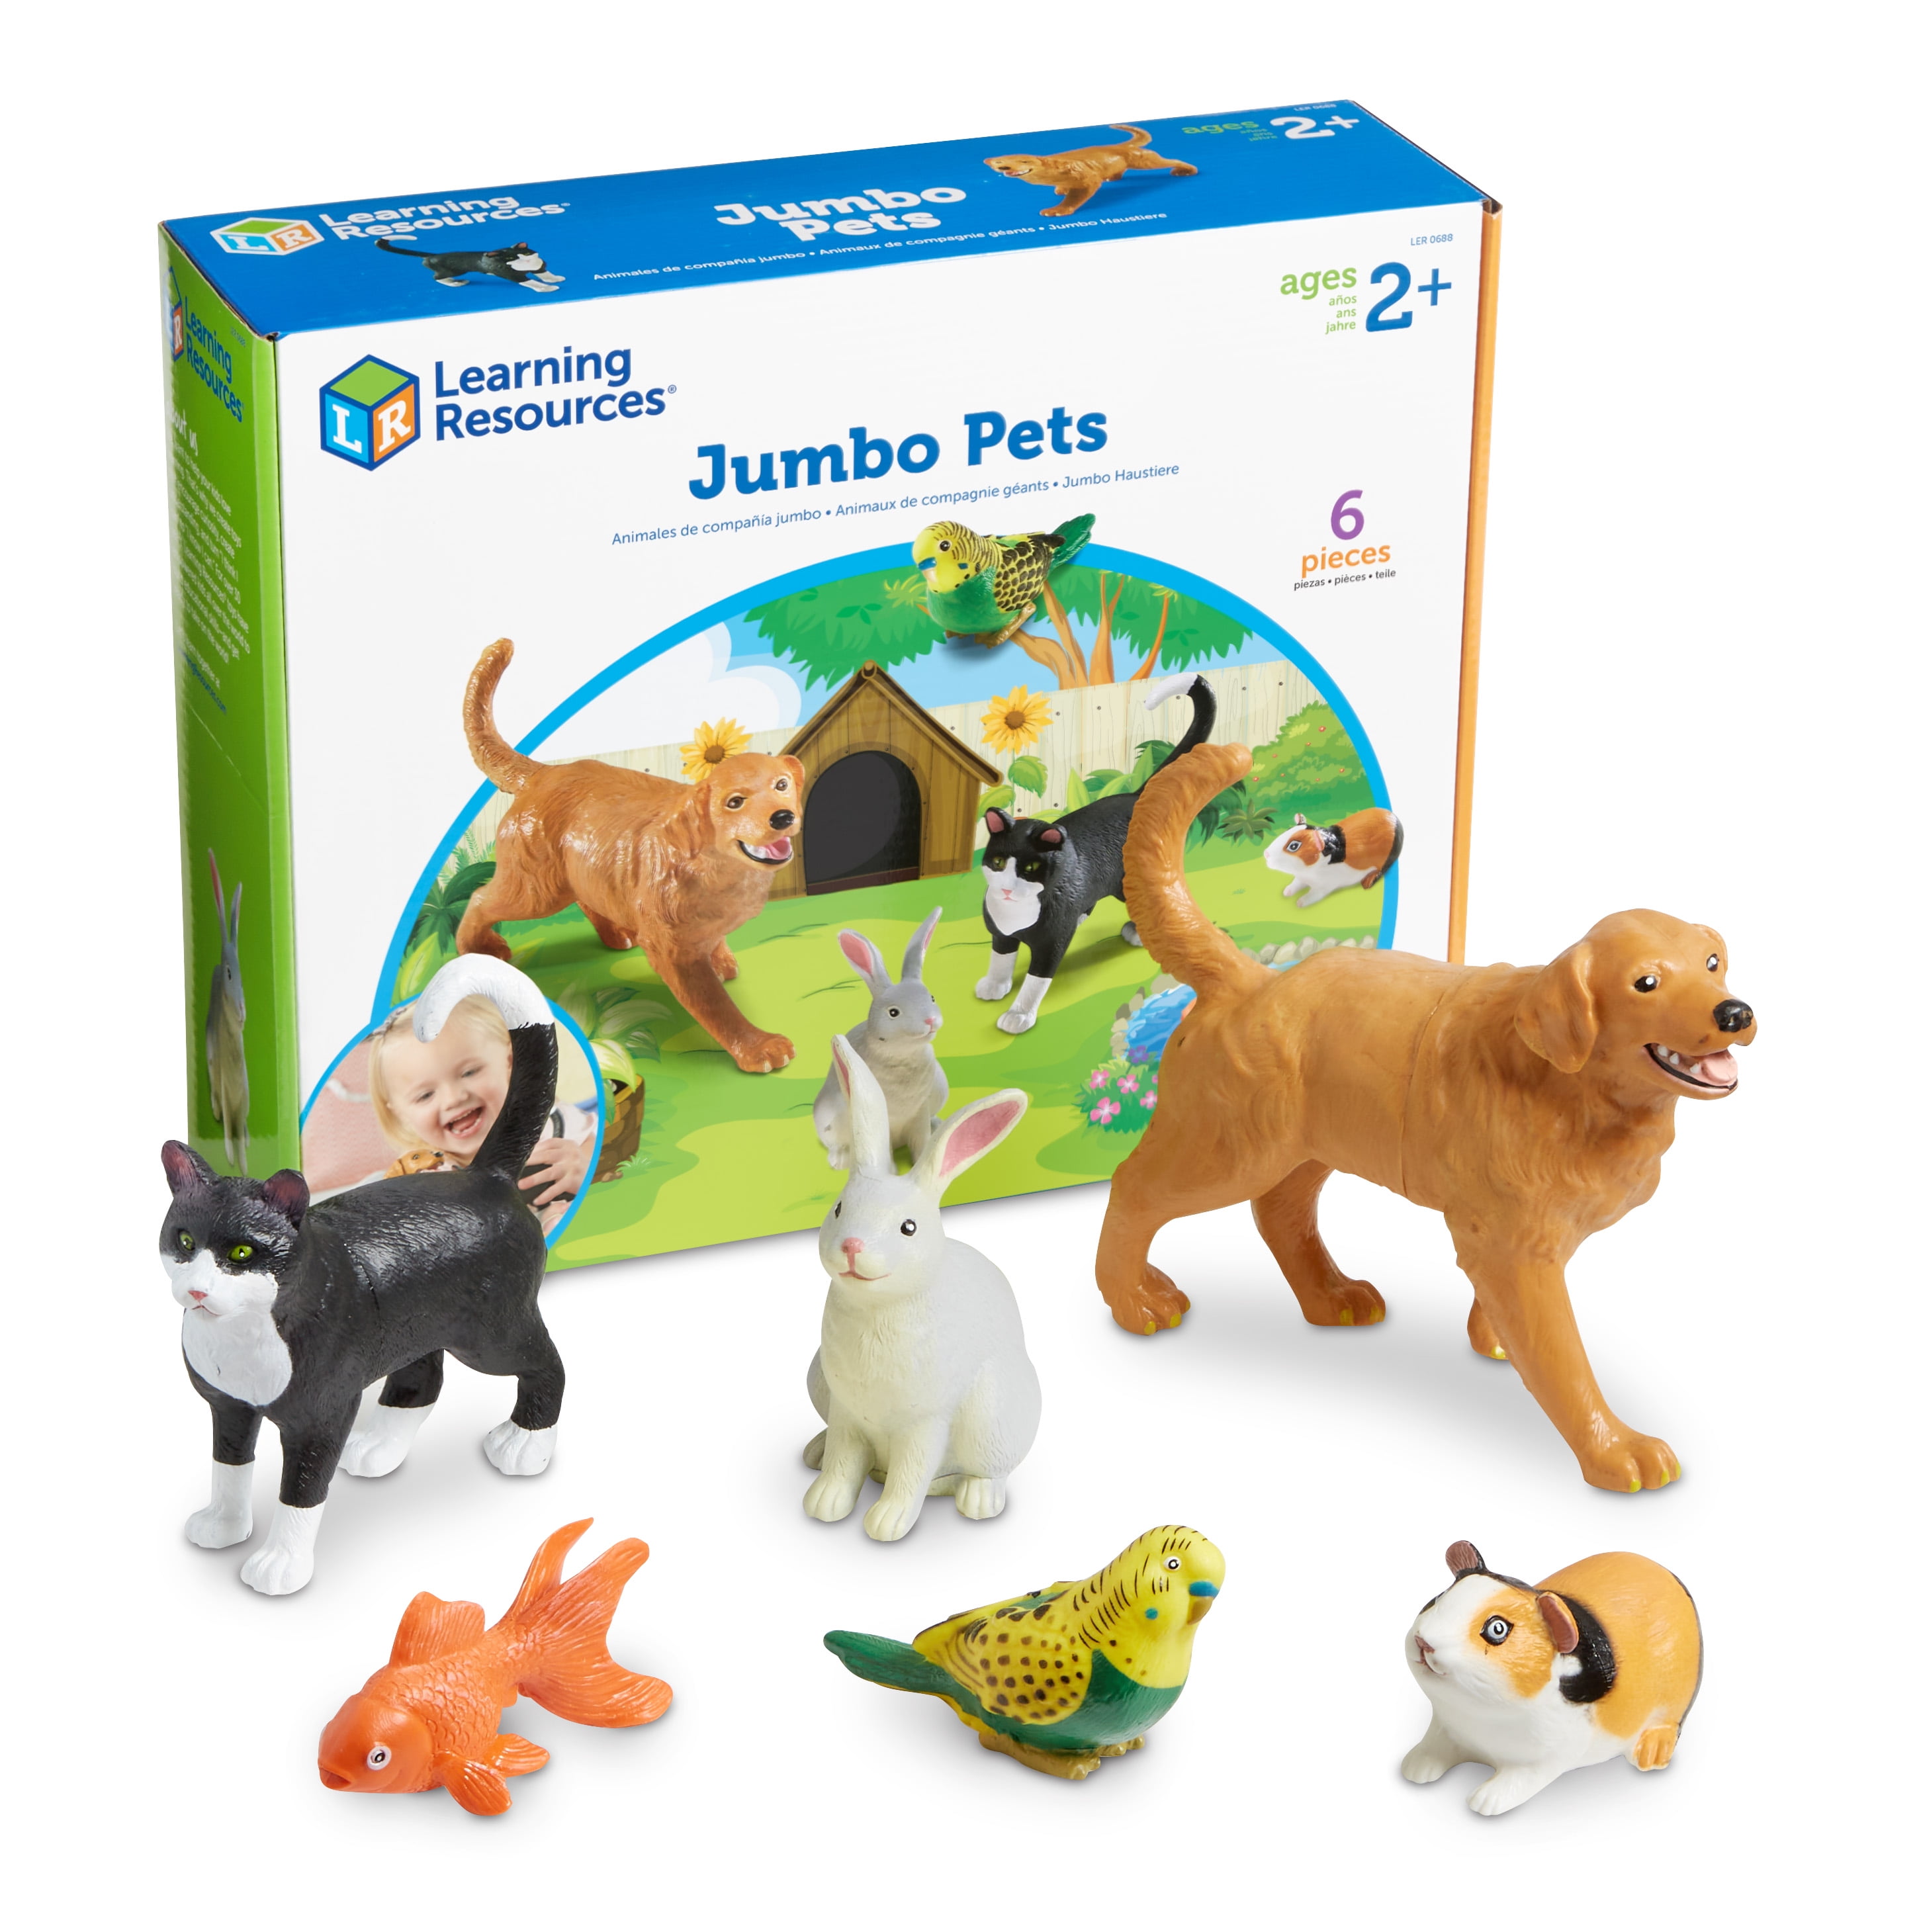 Learning Resources LER0694 Jumbo Farm Animals Pack of 7 for sale online 